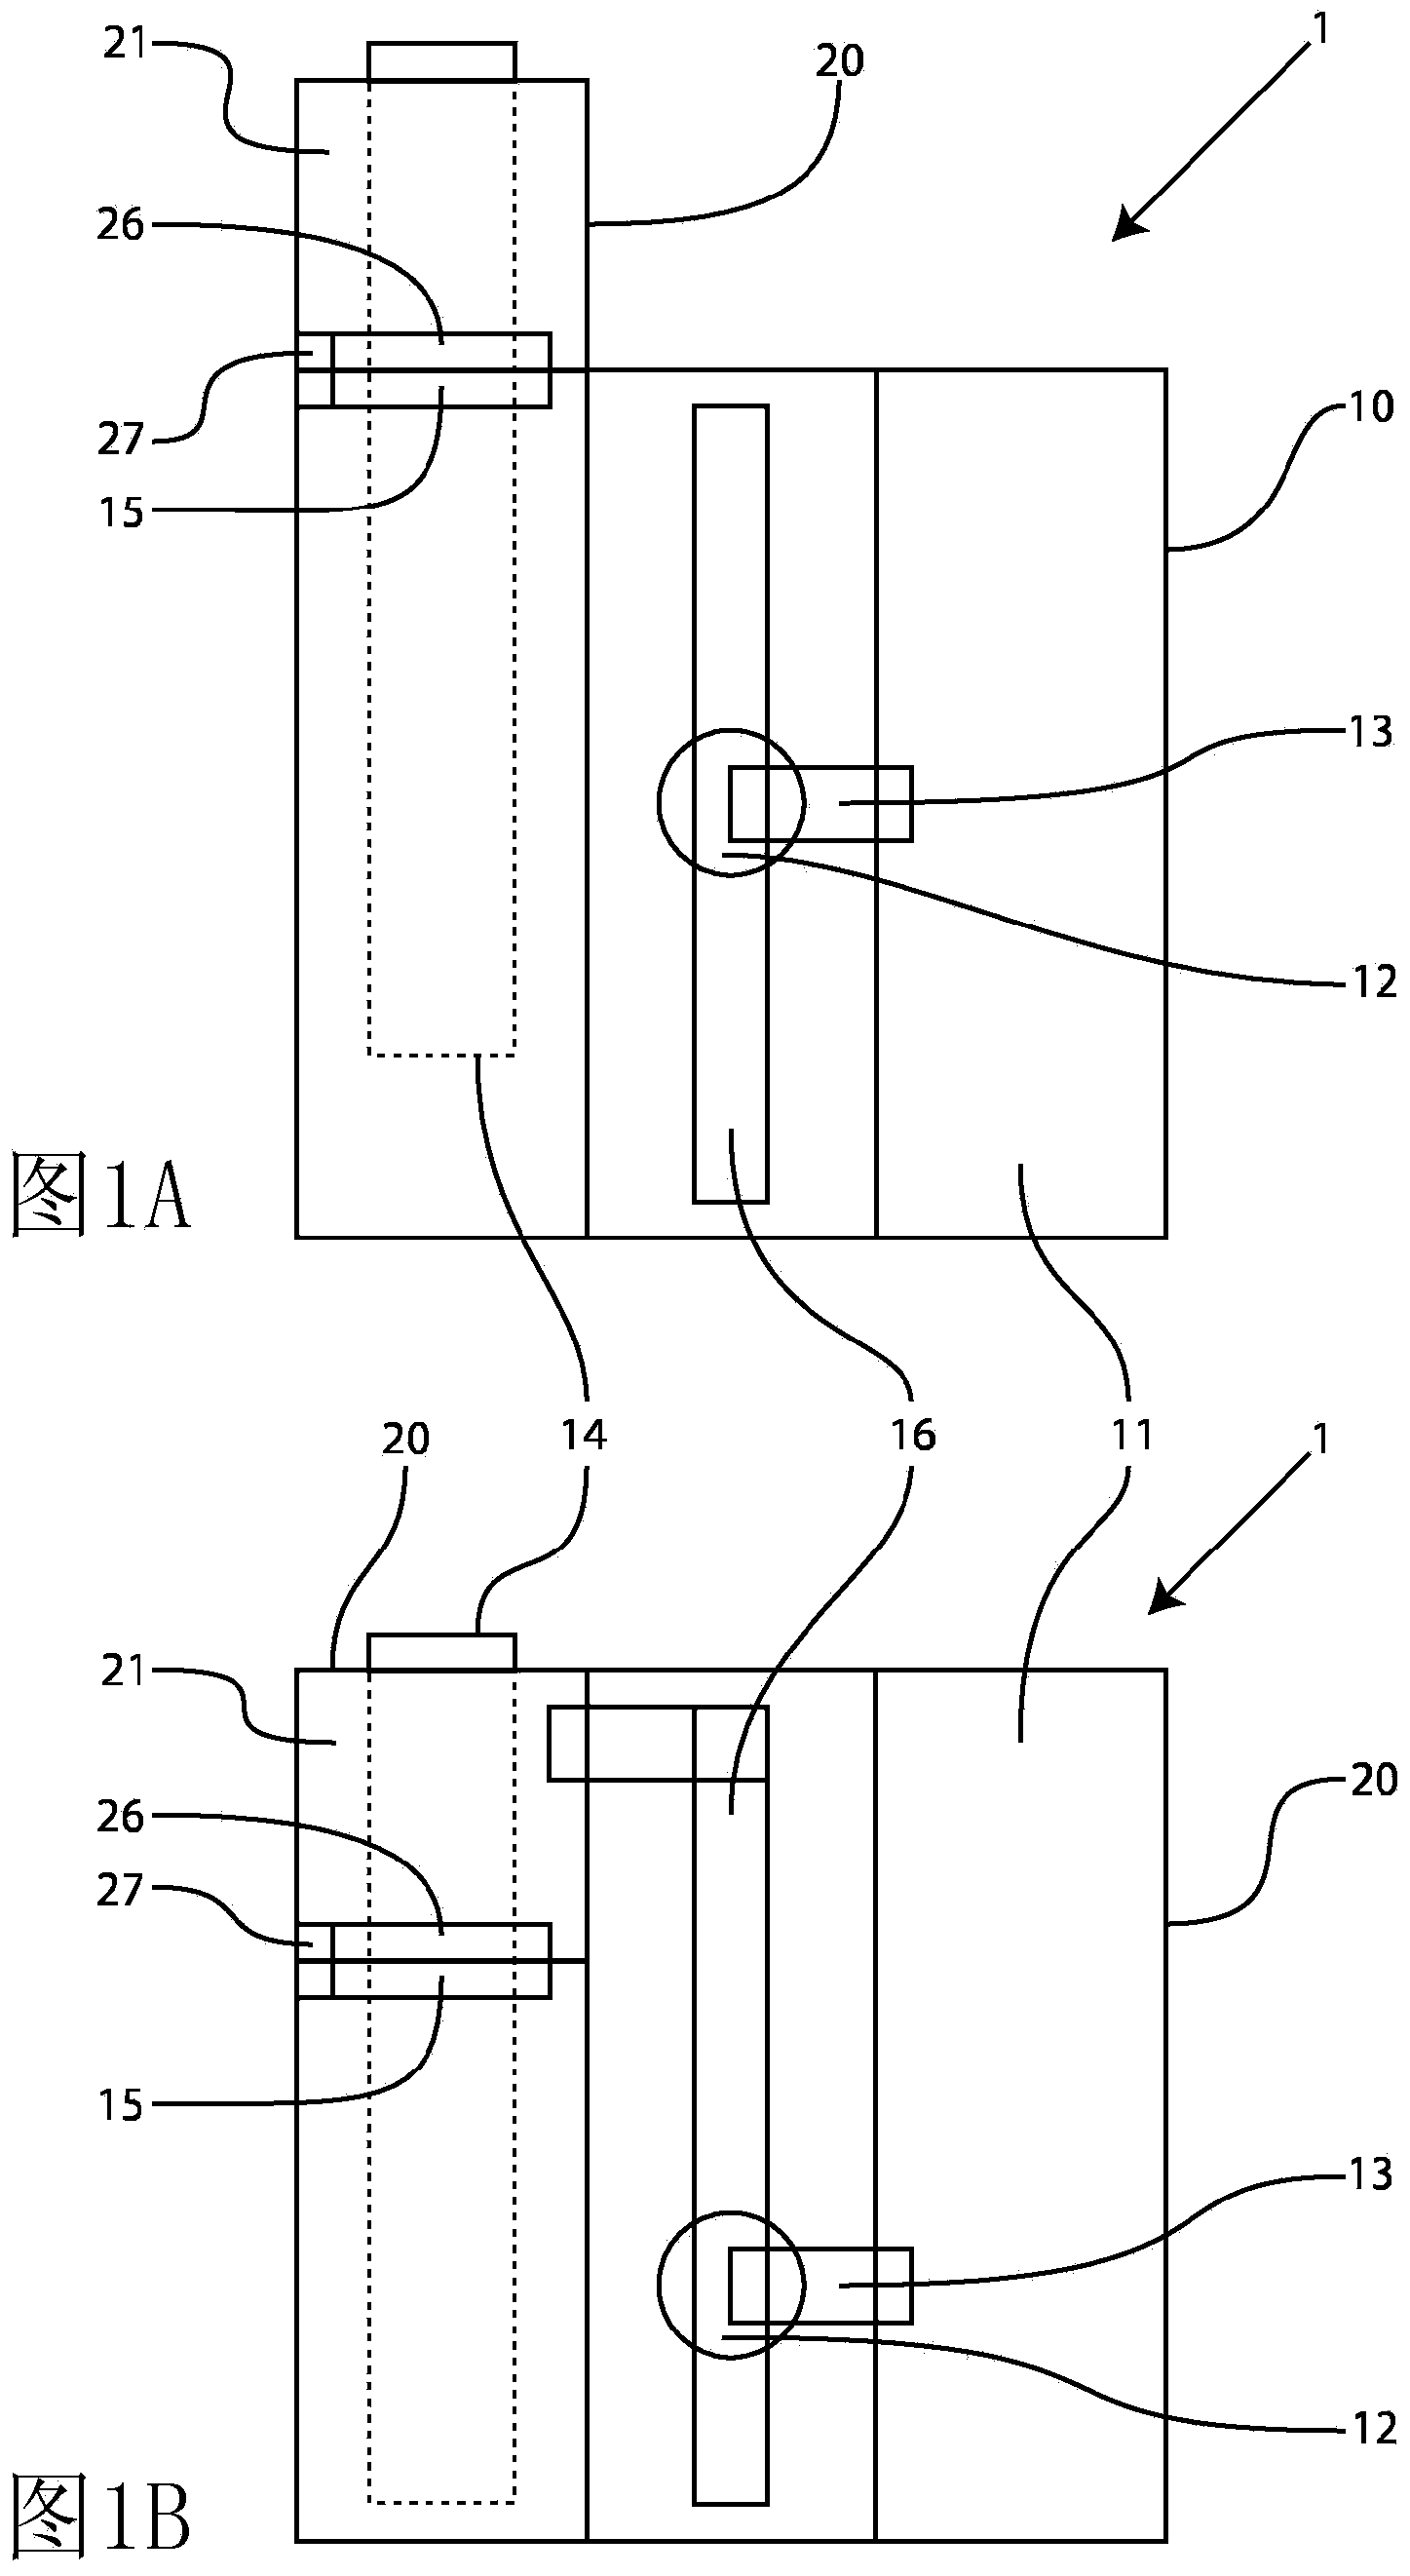 Pharmacy picking device comprising a universal supply-and-control module